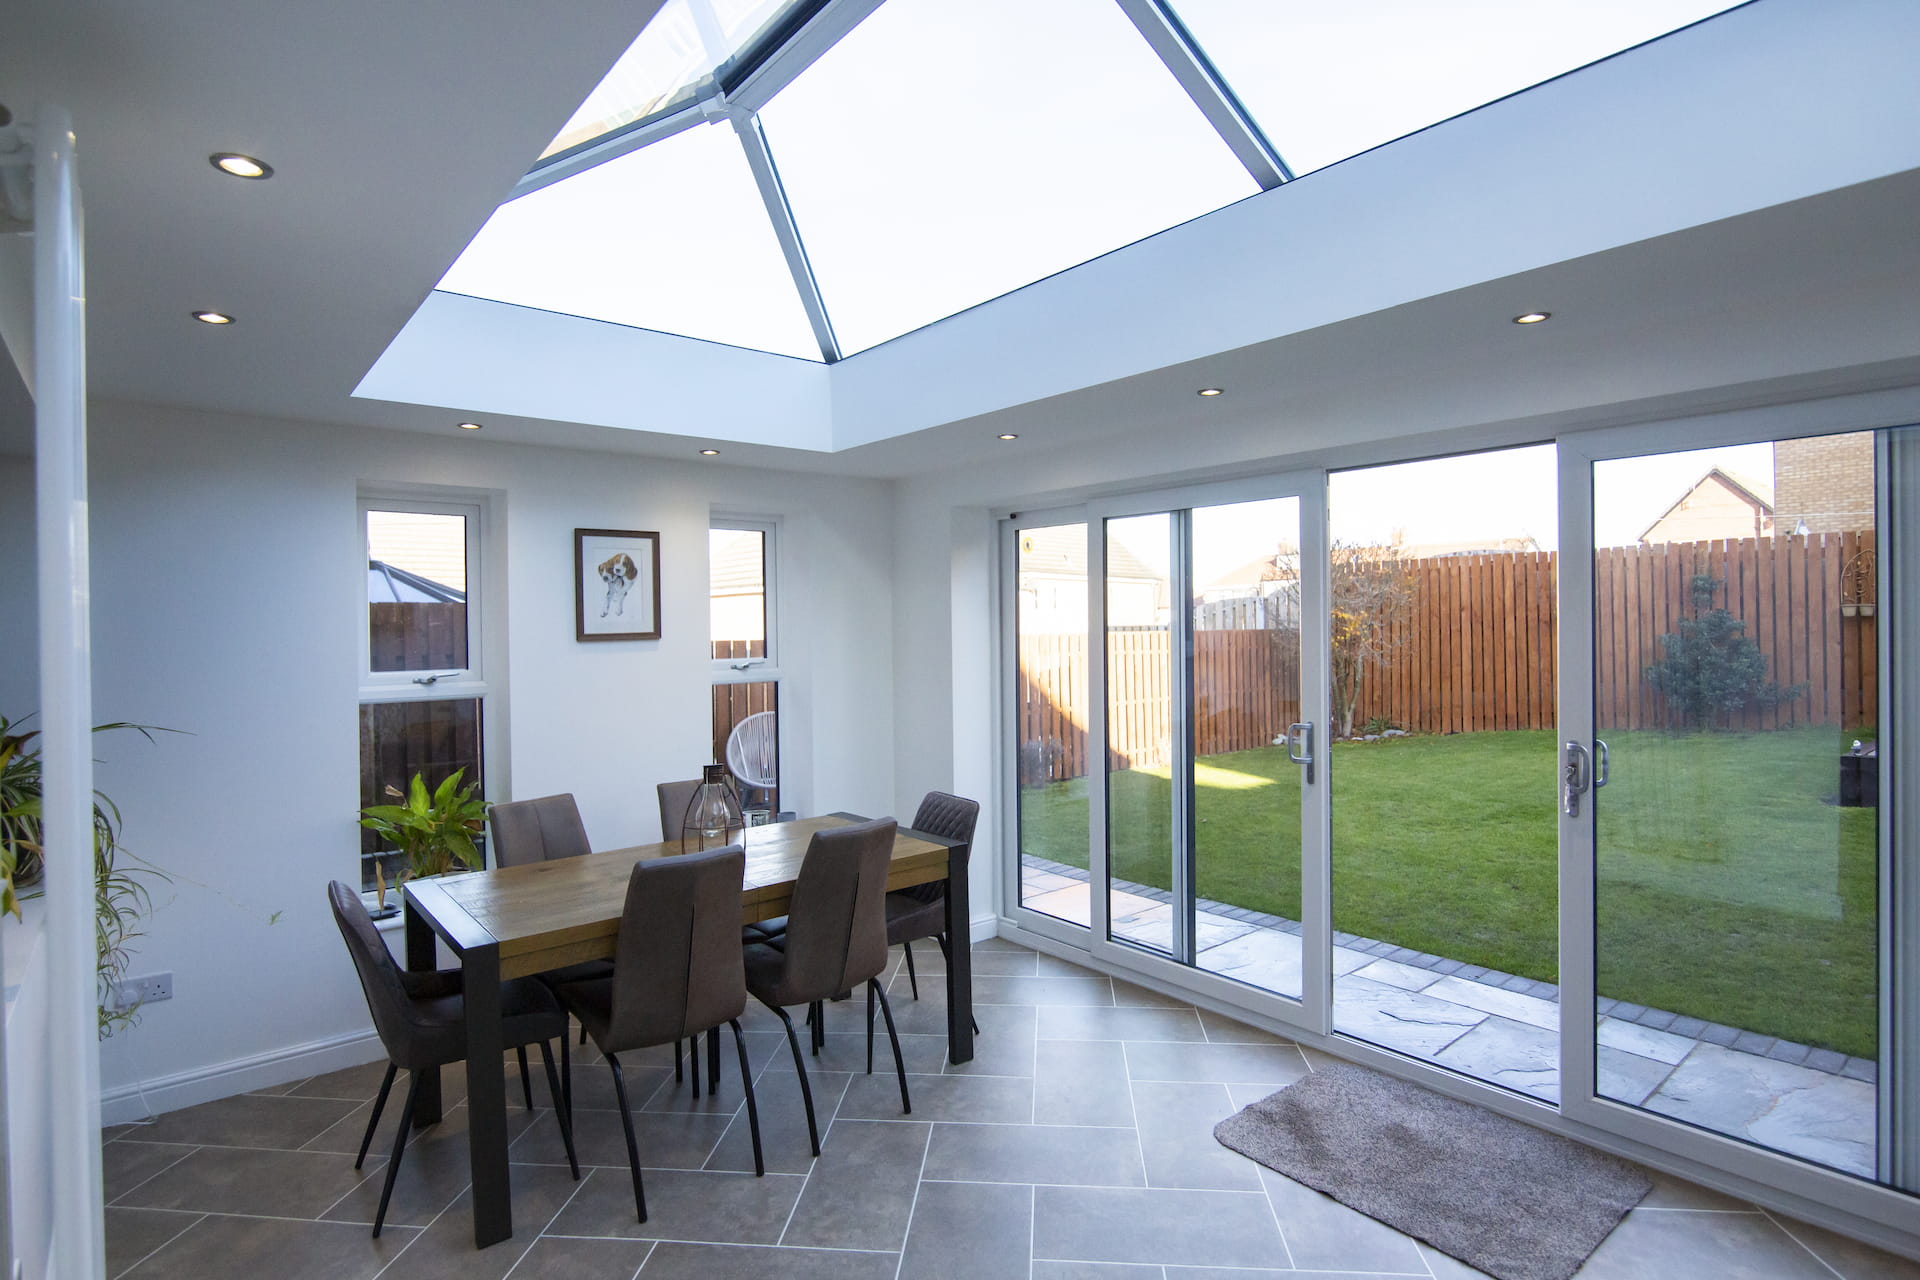 tiled conservatory roof